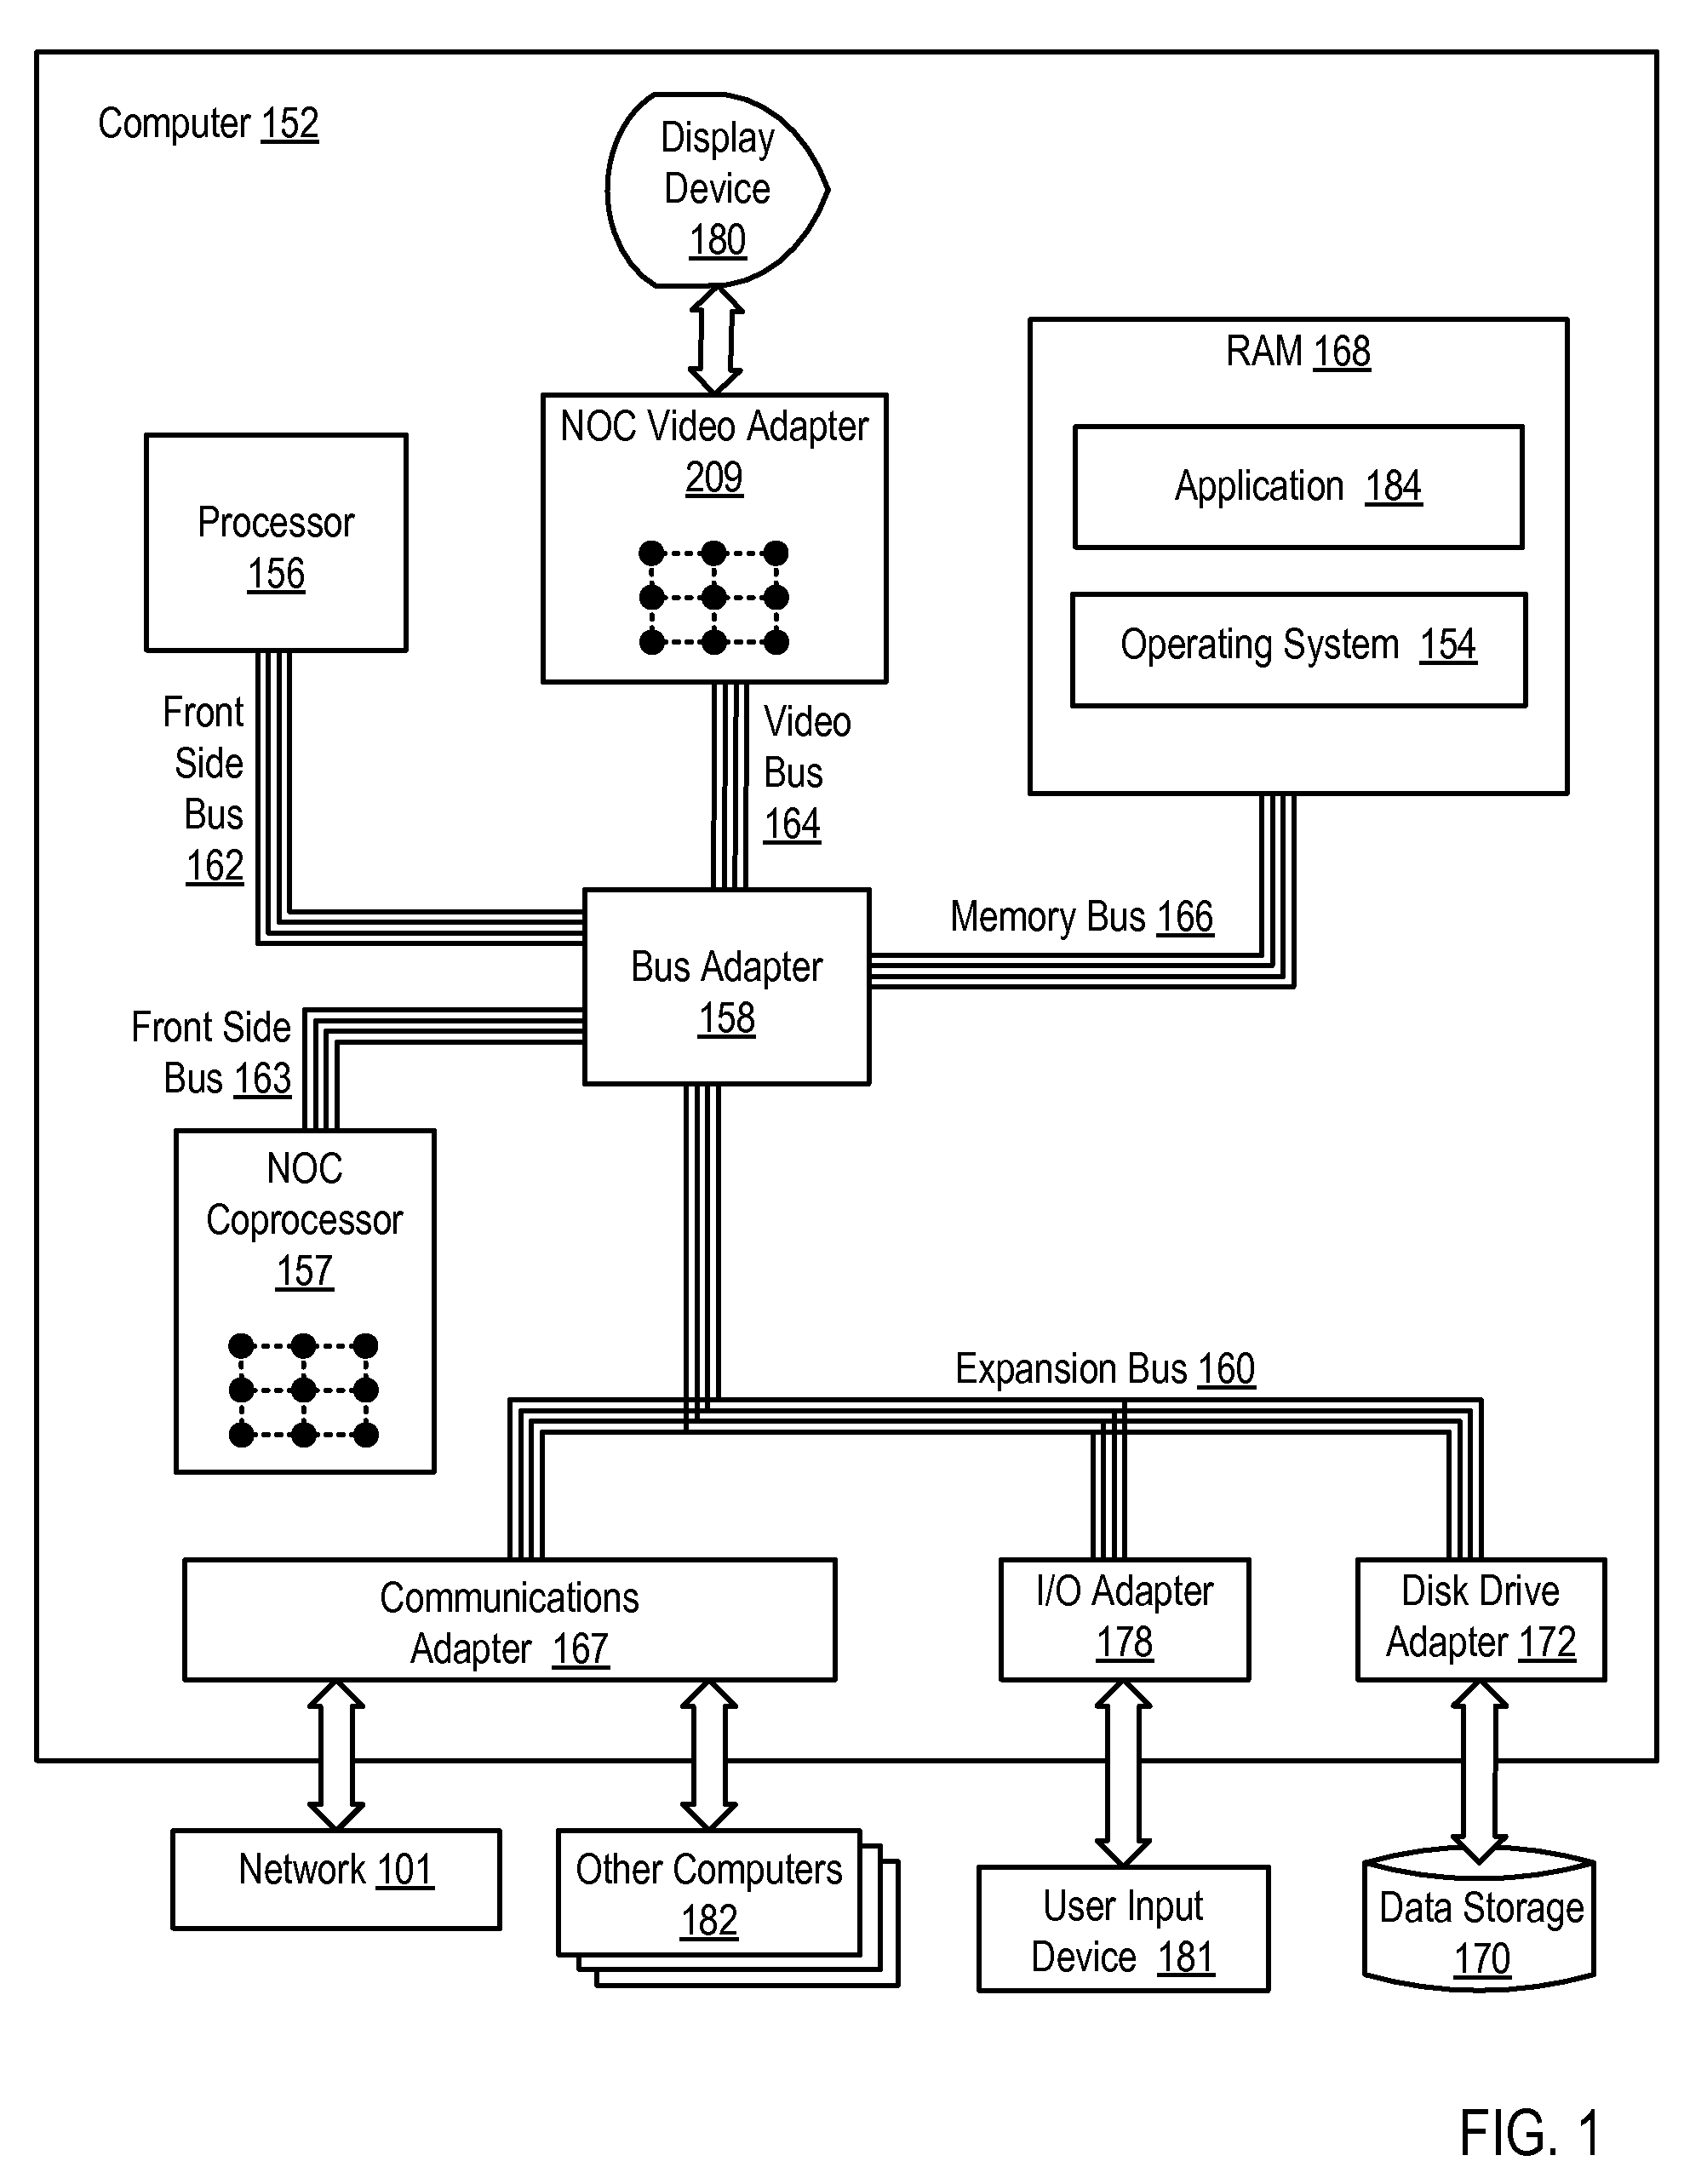 Dynamic virtual software pipelining on a network on chip